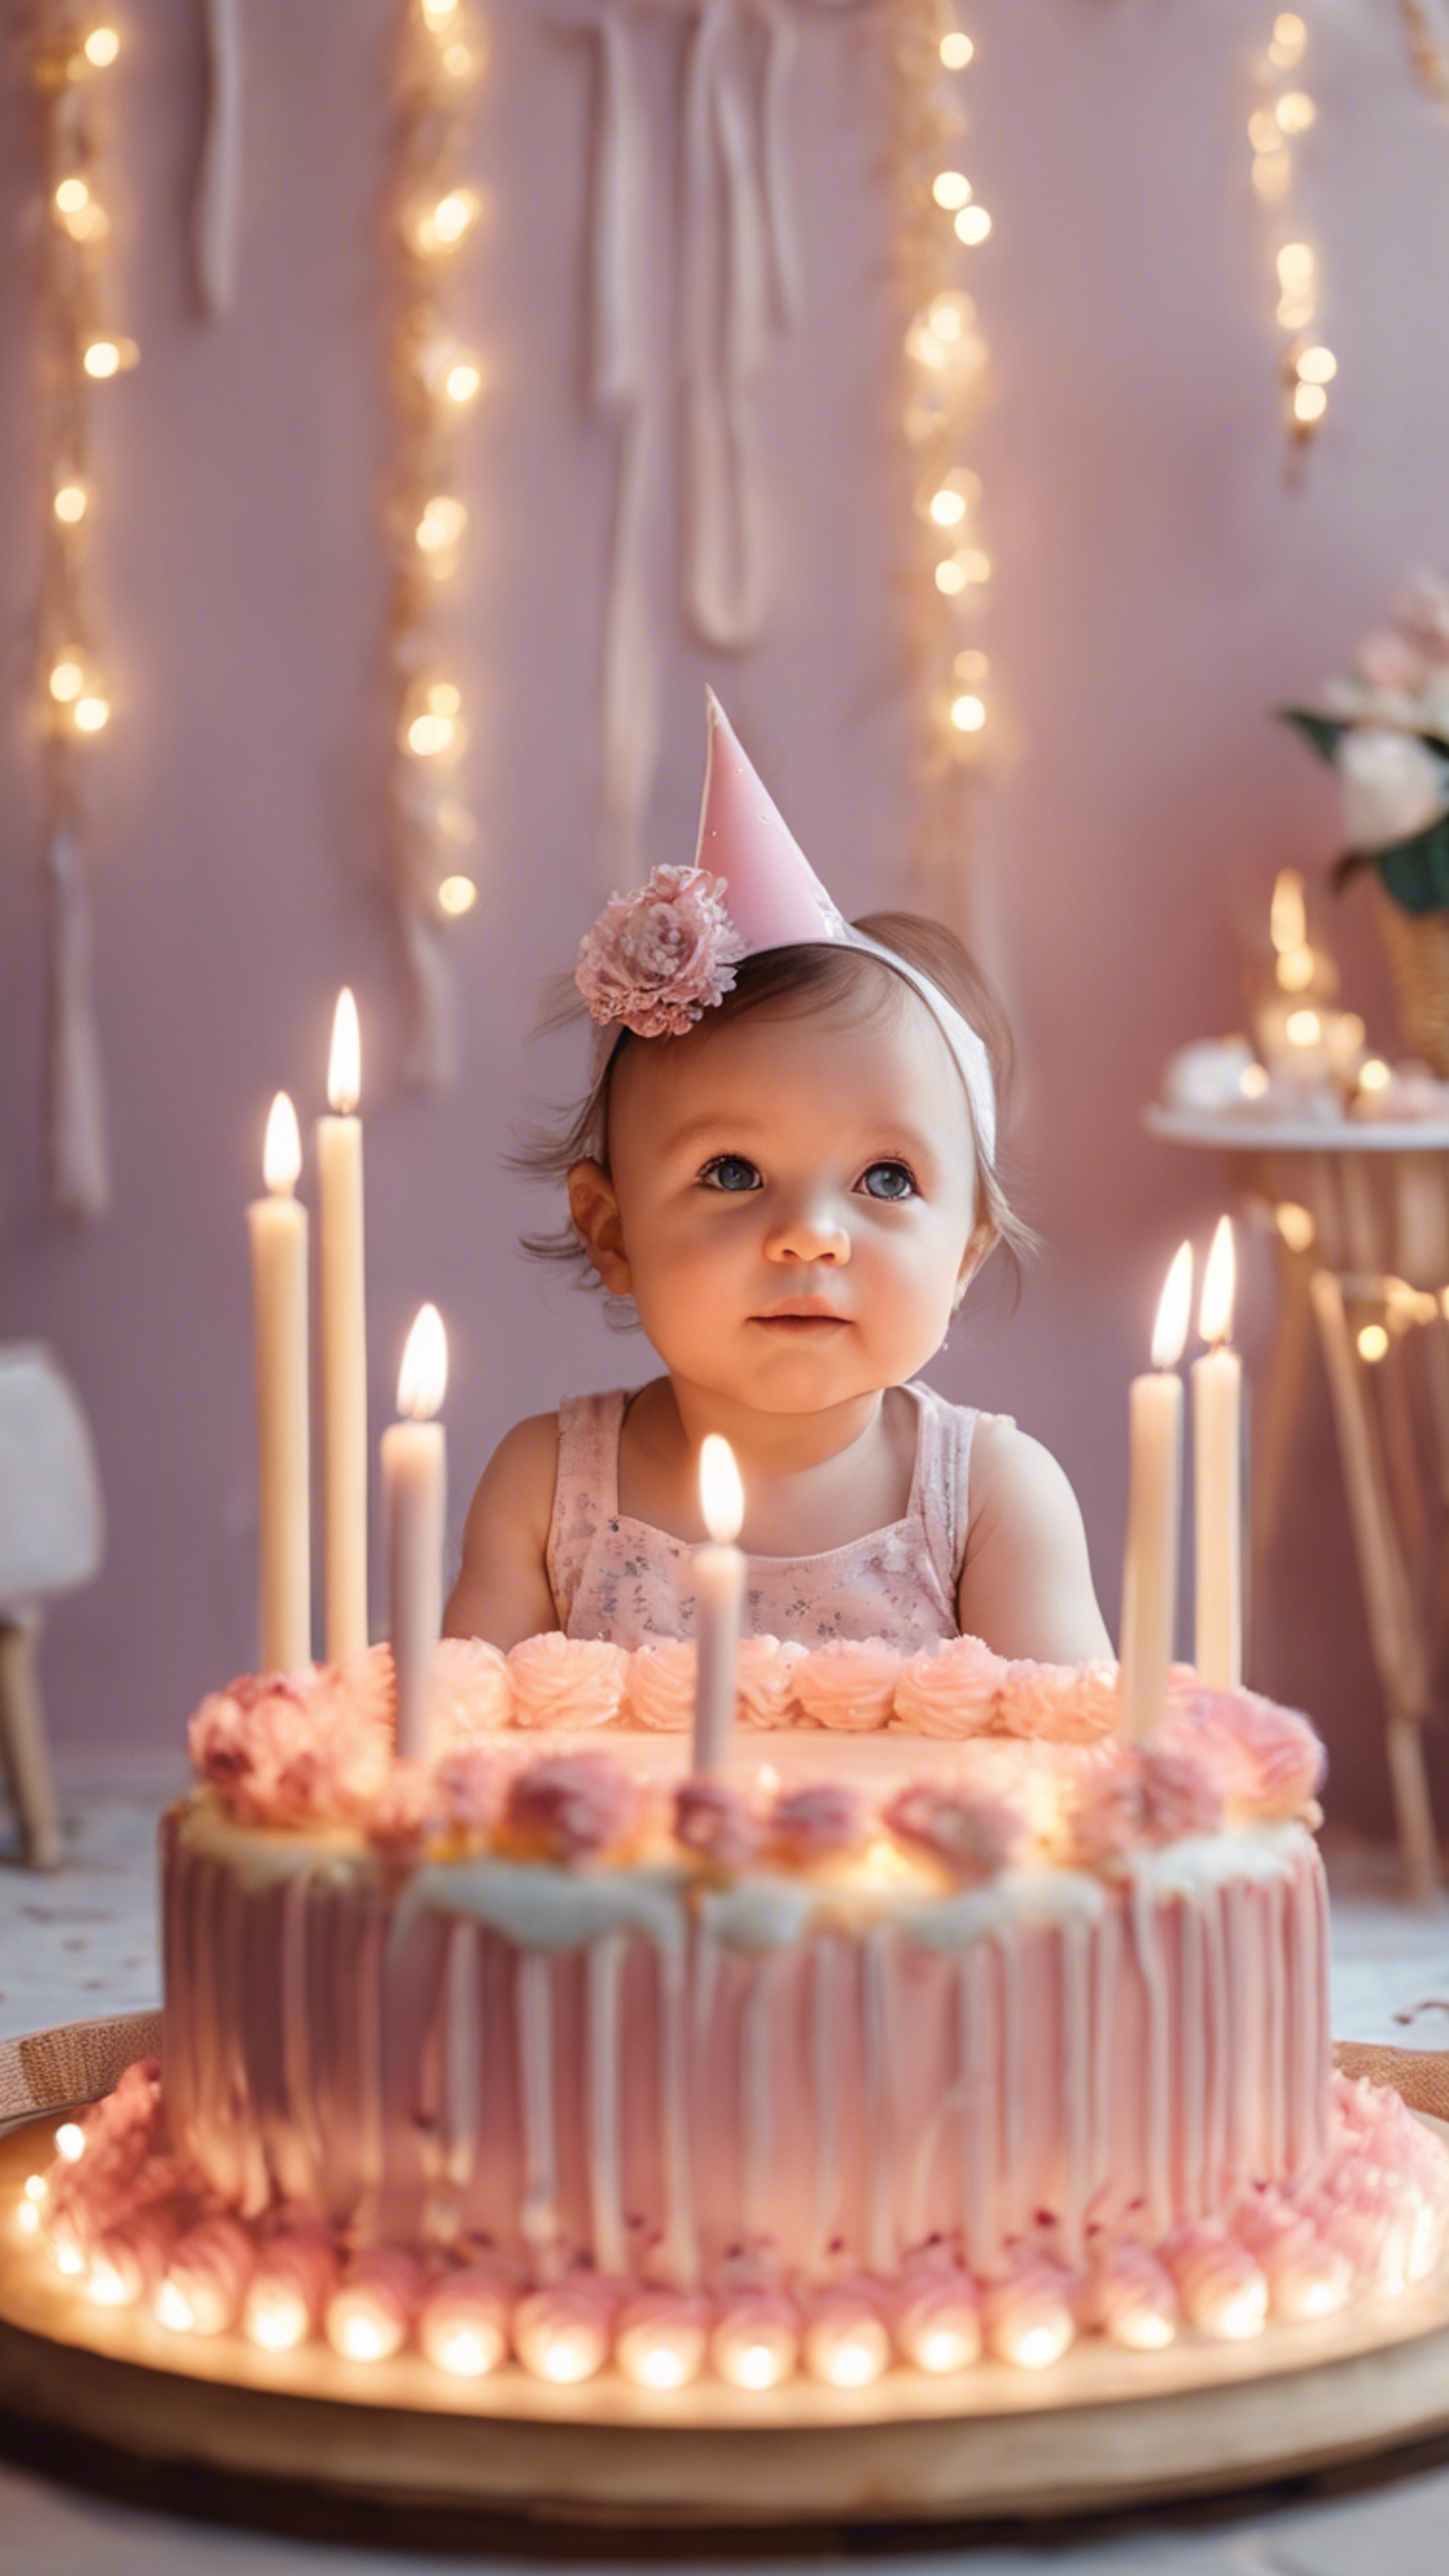 A baby girl sitting in front of a large birthday cake with one candle. Ταπετσαρία[40d9127ac31741659290]